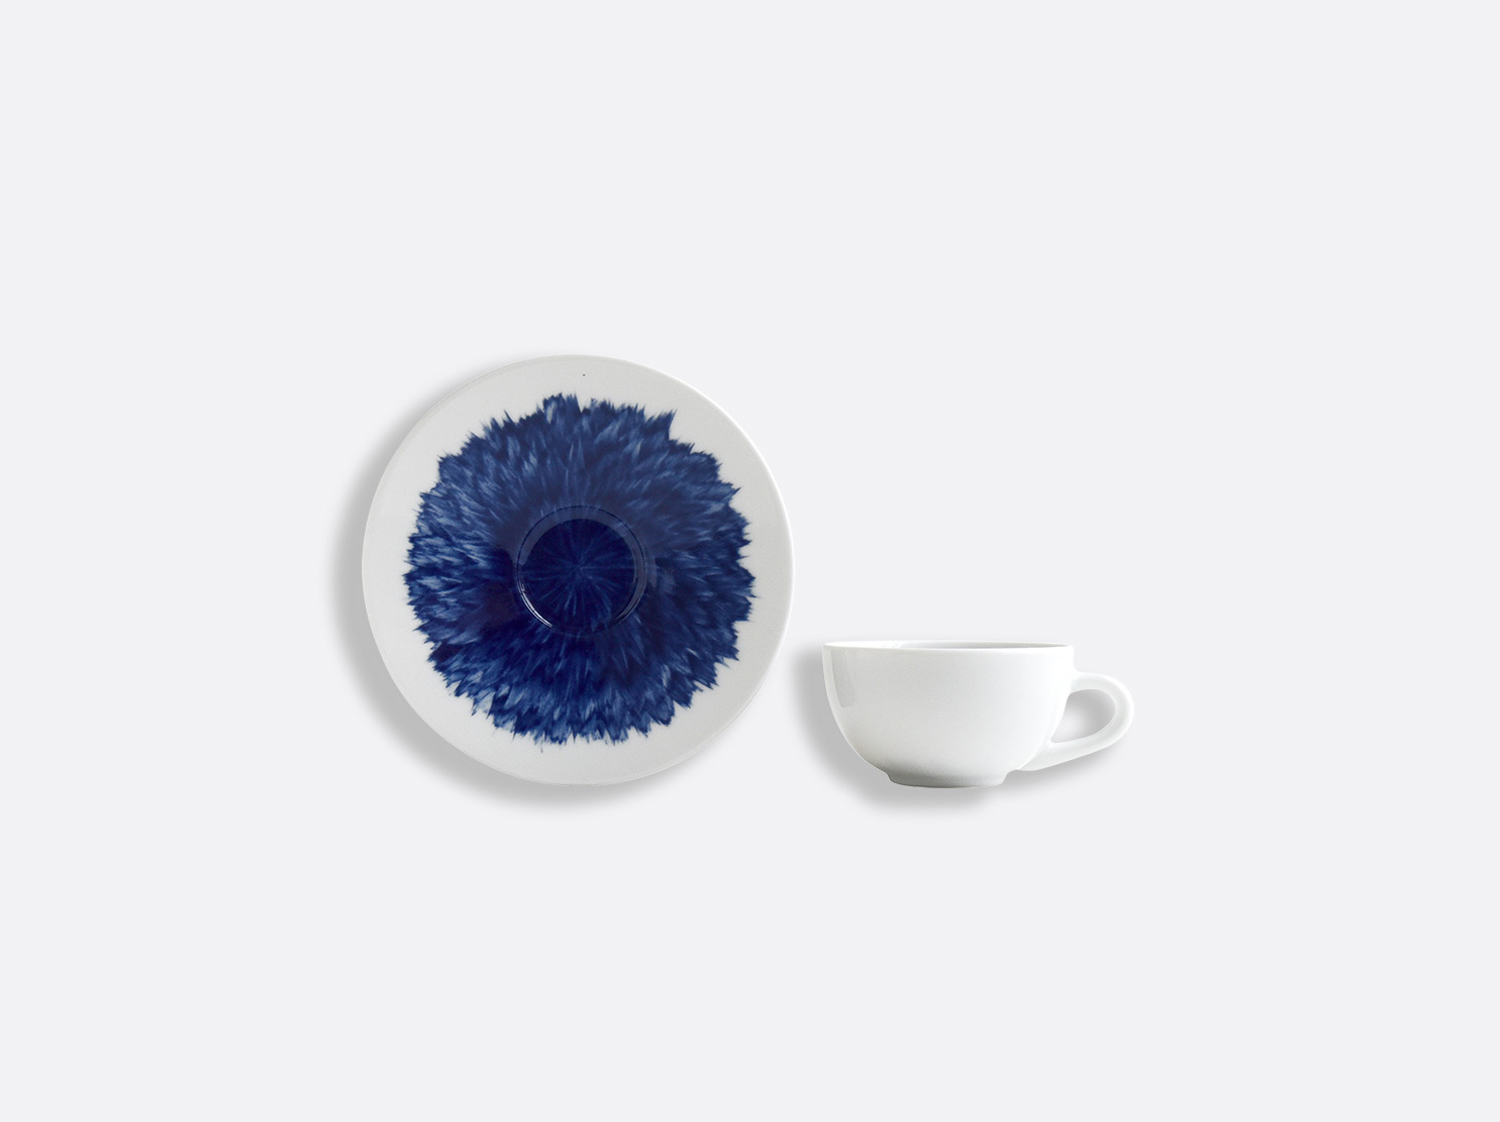 China Espresso cup and saucer 3.5 oz of the collection IN BLOOM - Zemer Peled | Bernardaud